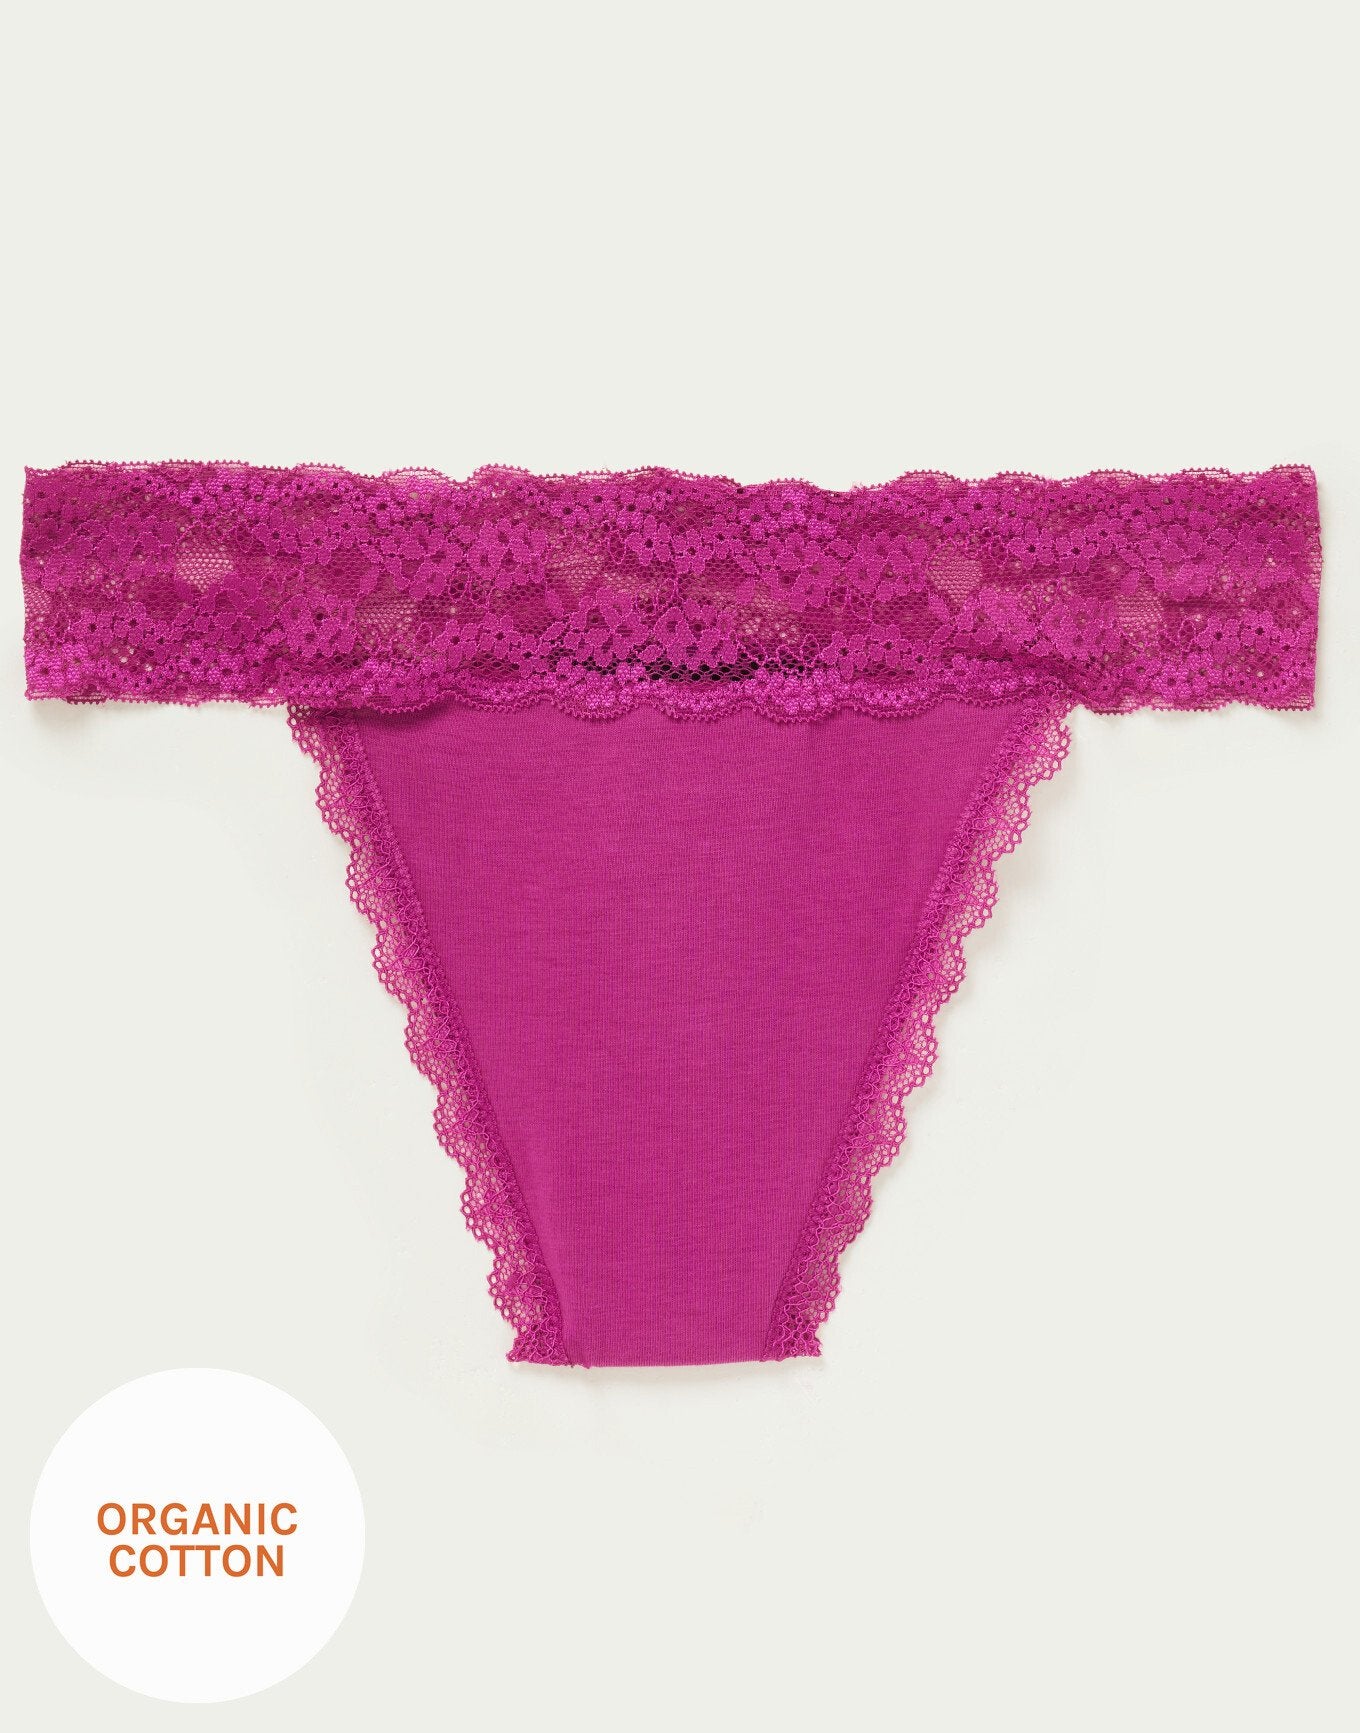 Joyja Lily period-proof panty in color Festival Fuchsia and shape thong